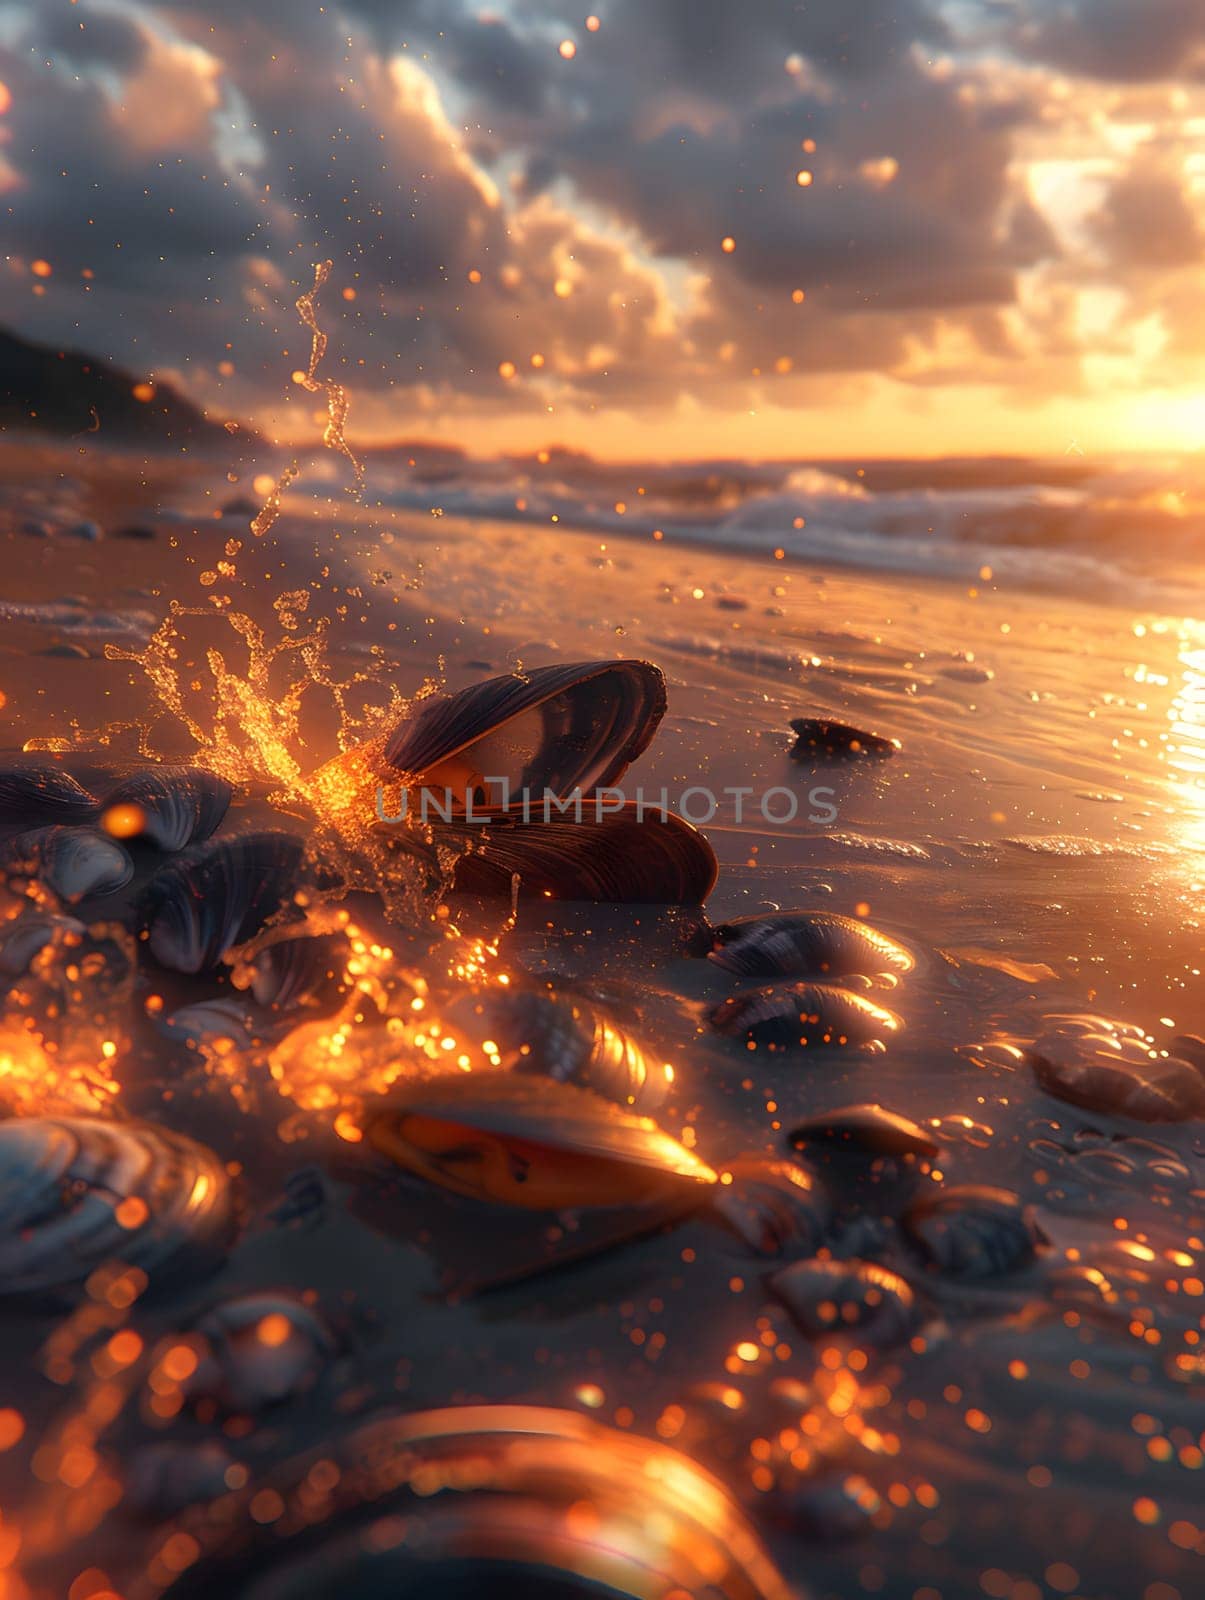 A close up of a rocky beach at sunset with the sky filled with a fluid orange afterglow, creating a serene and atmospheric atmosphere